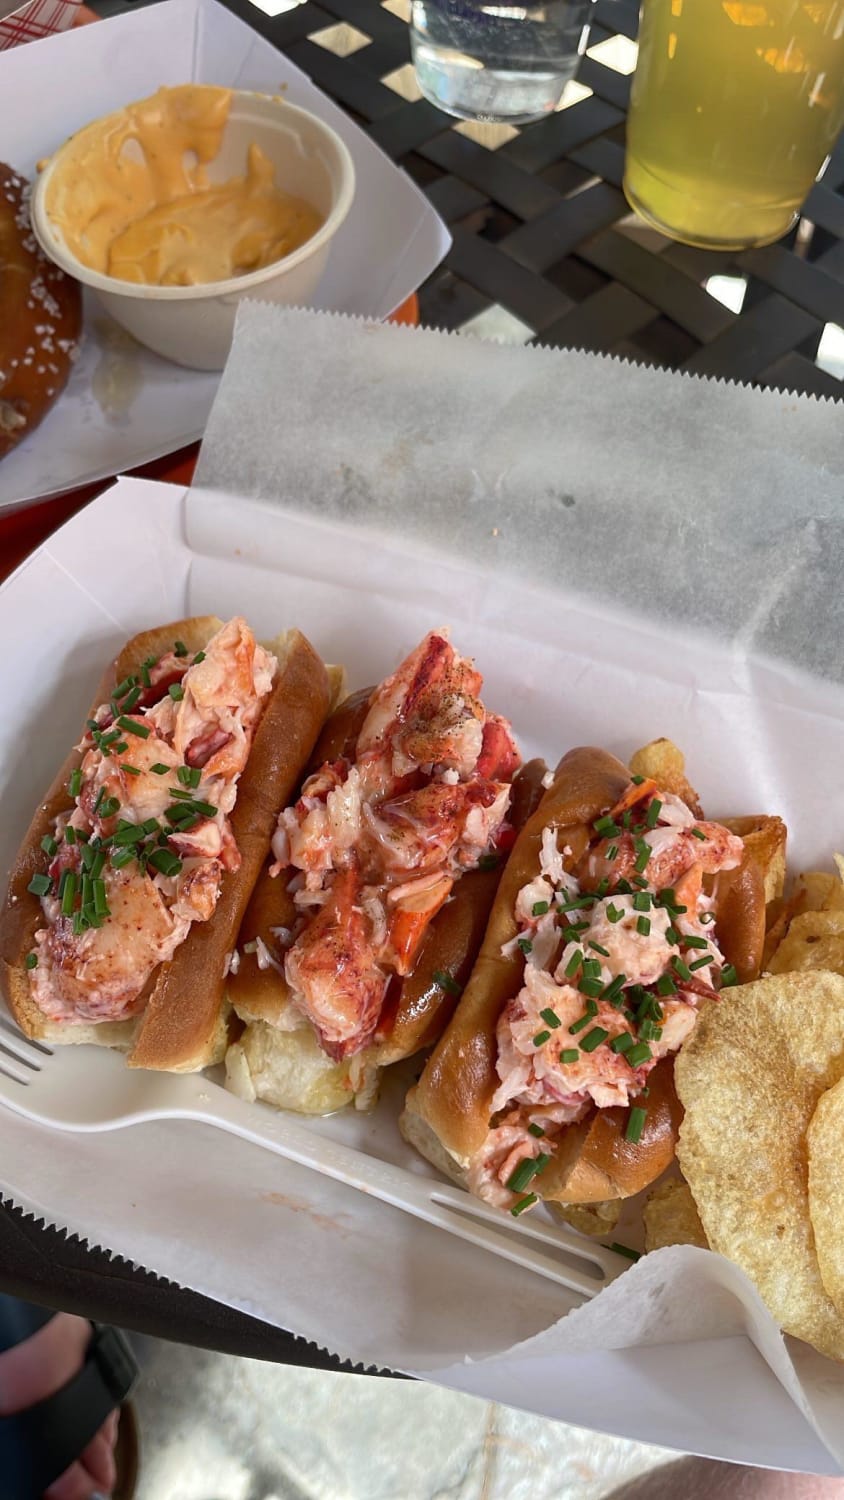 A lobster roll flight from Allagash Brewery in Portland, ME